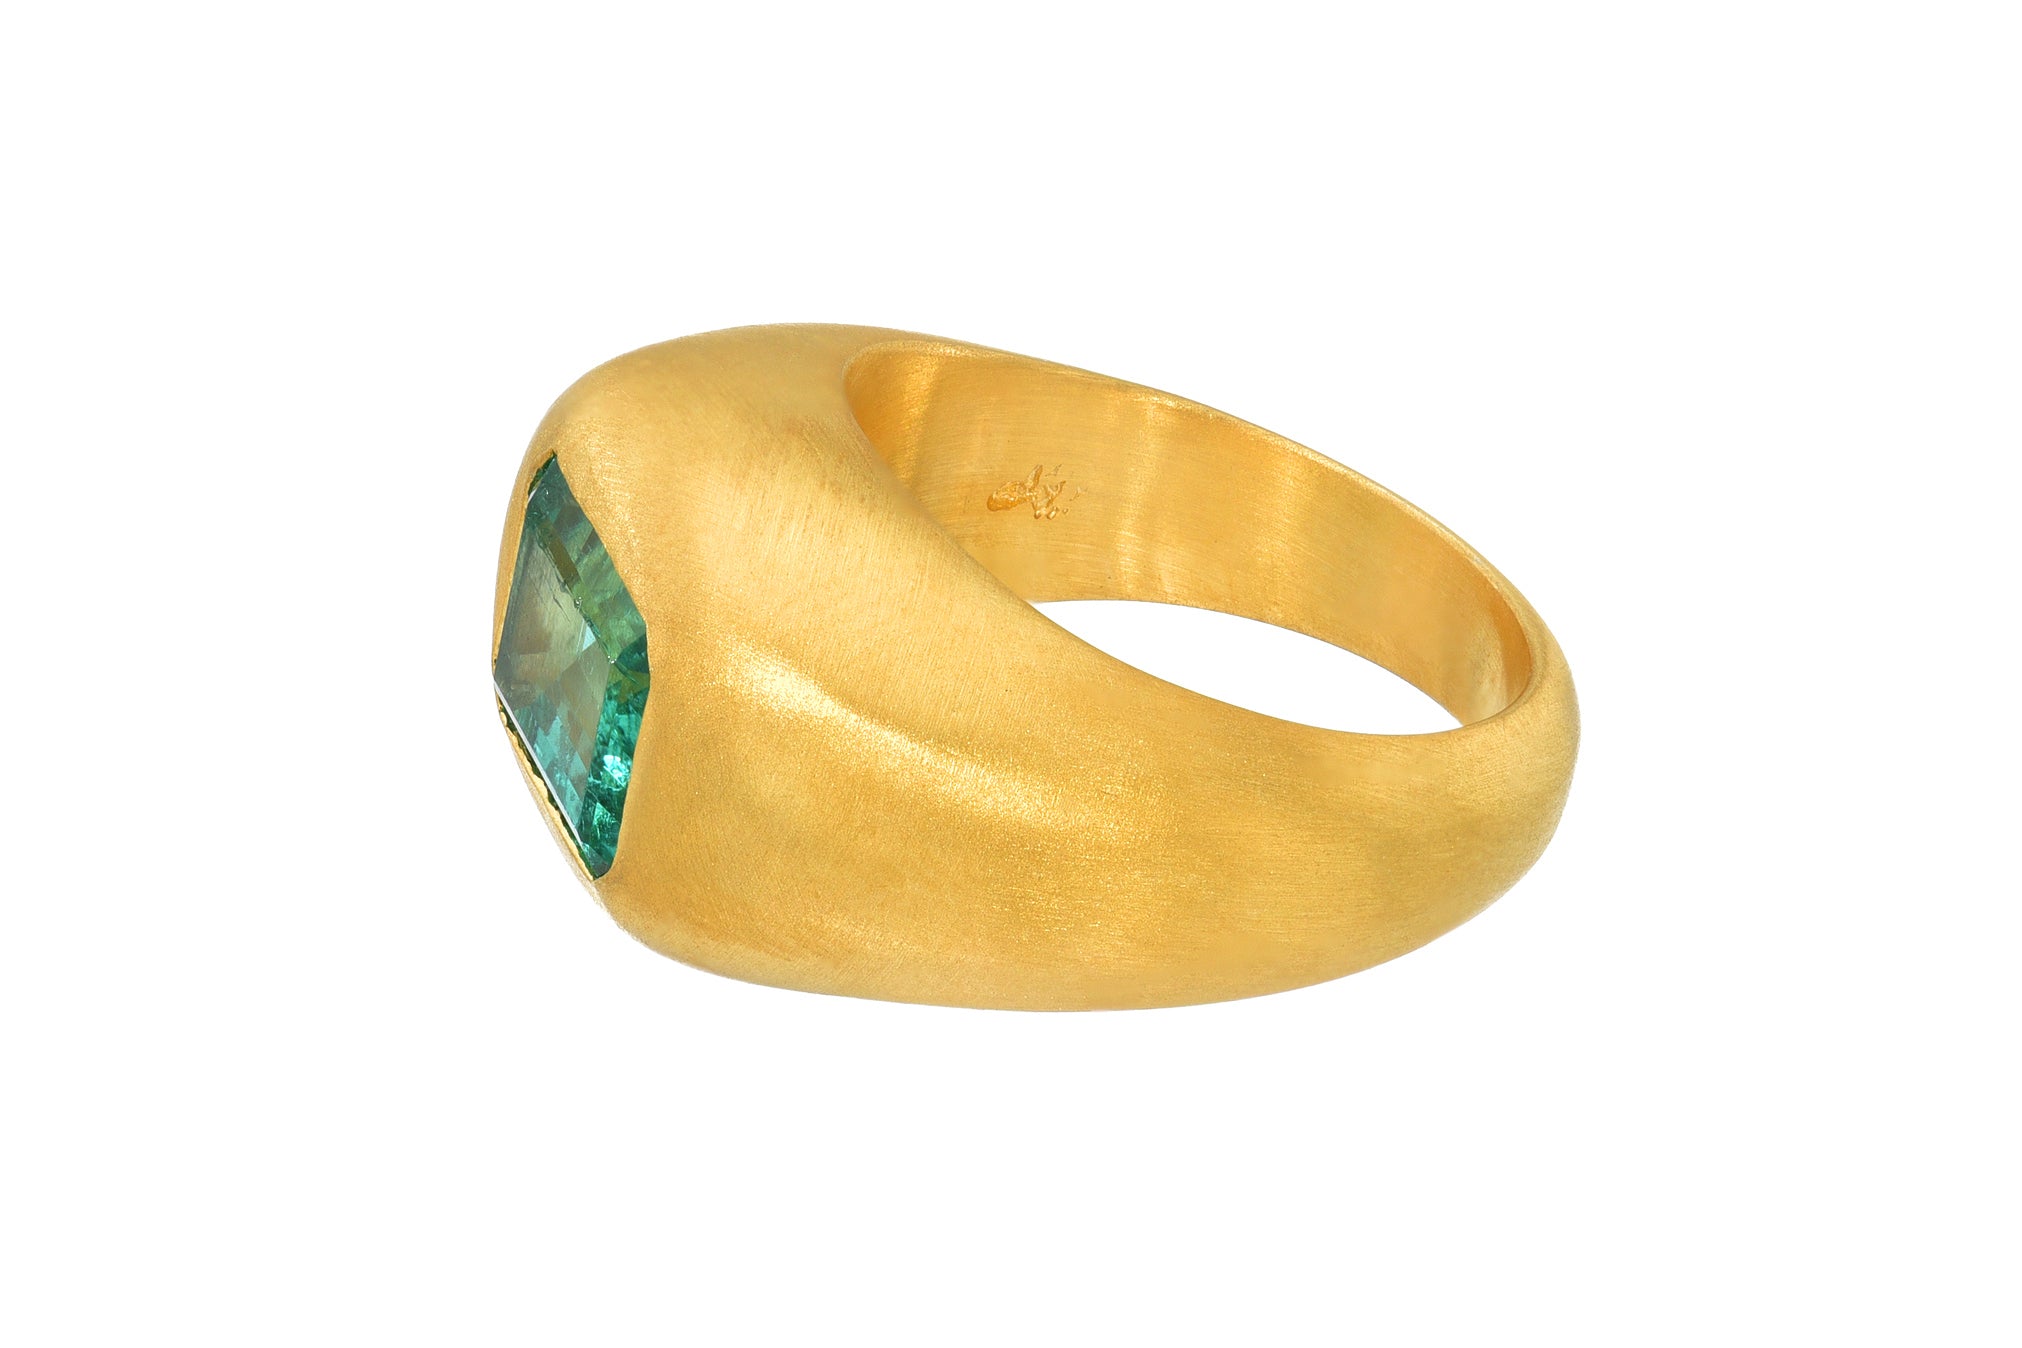 ONE OF A KIND MINT EMERALD GEM SIGNET RING